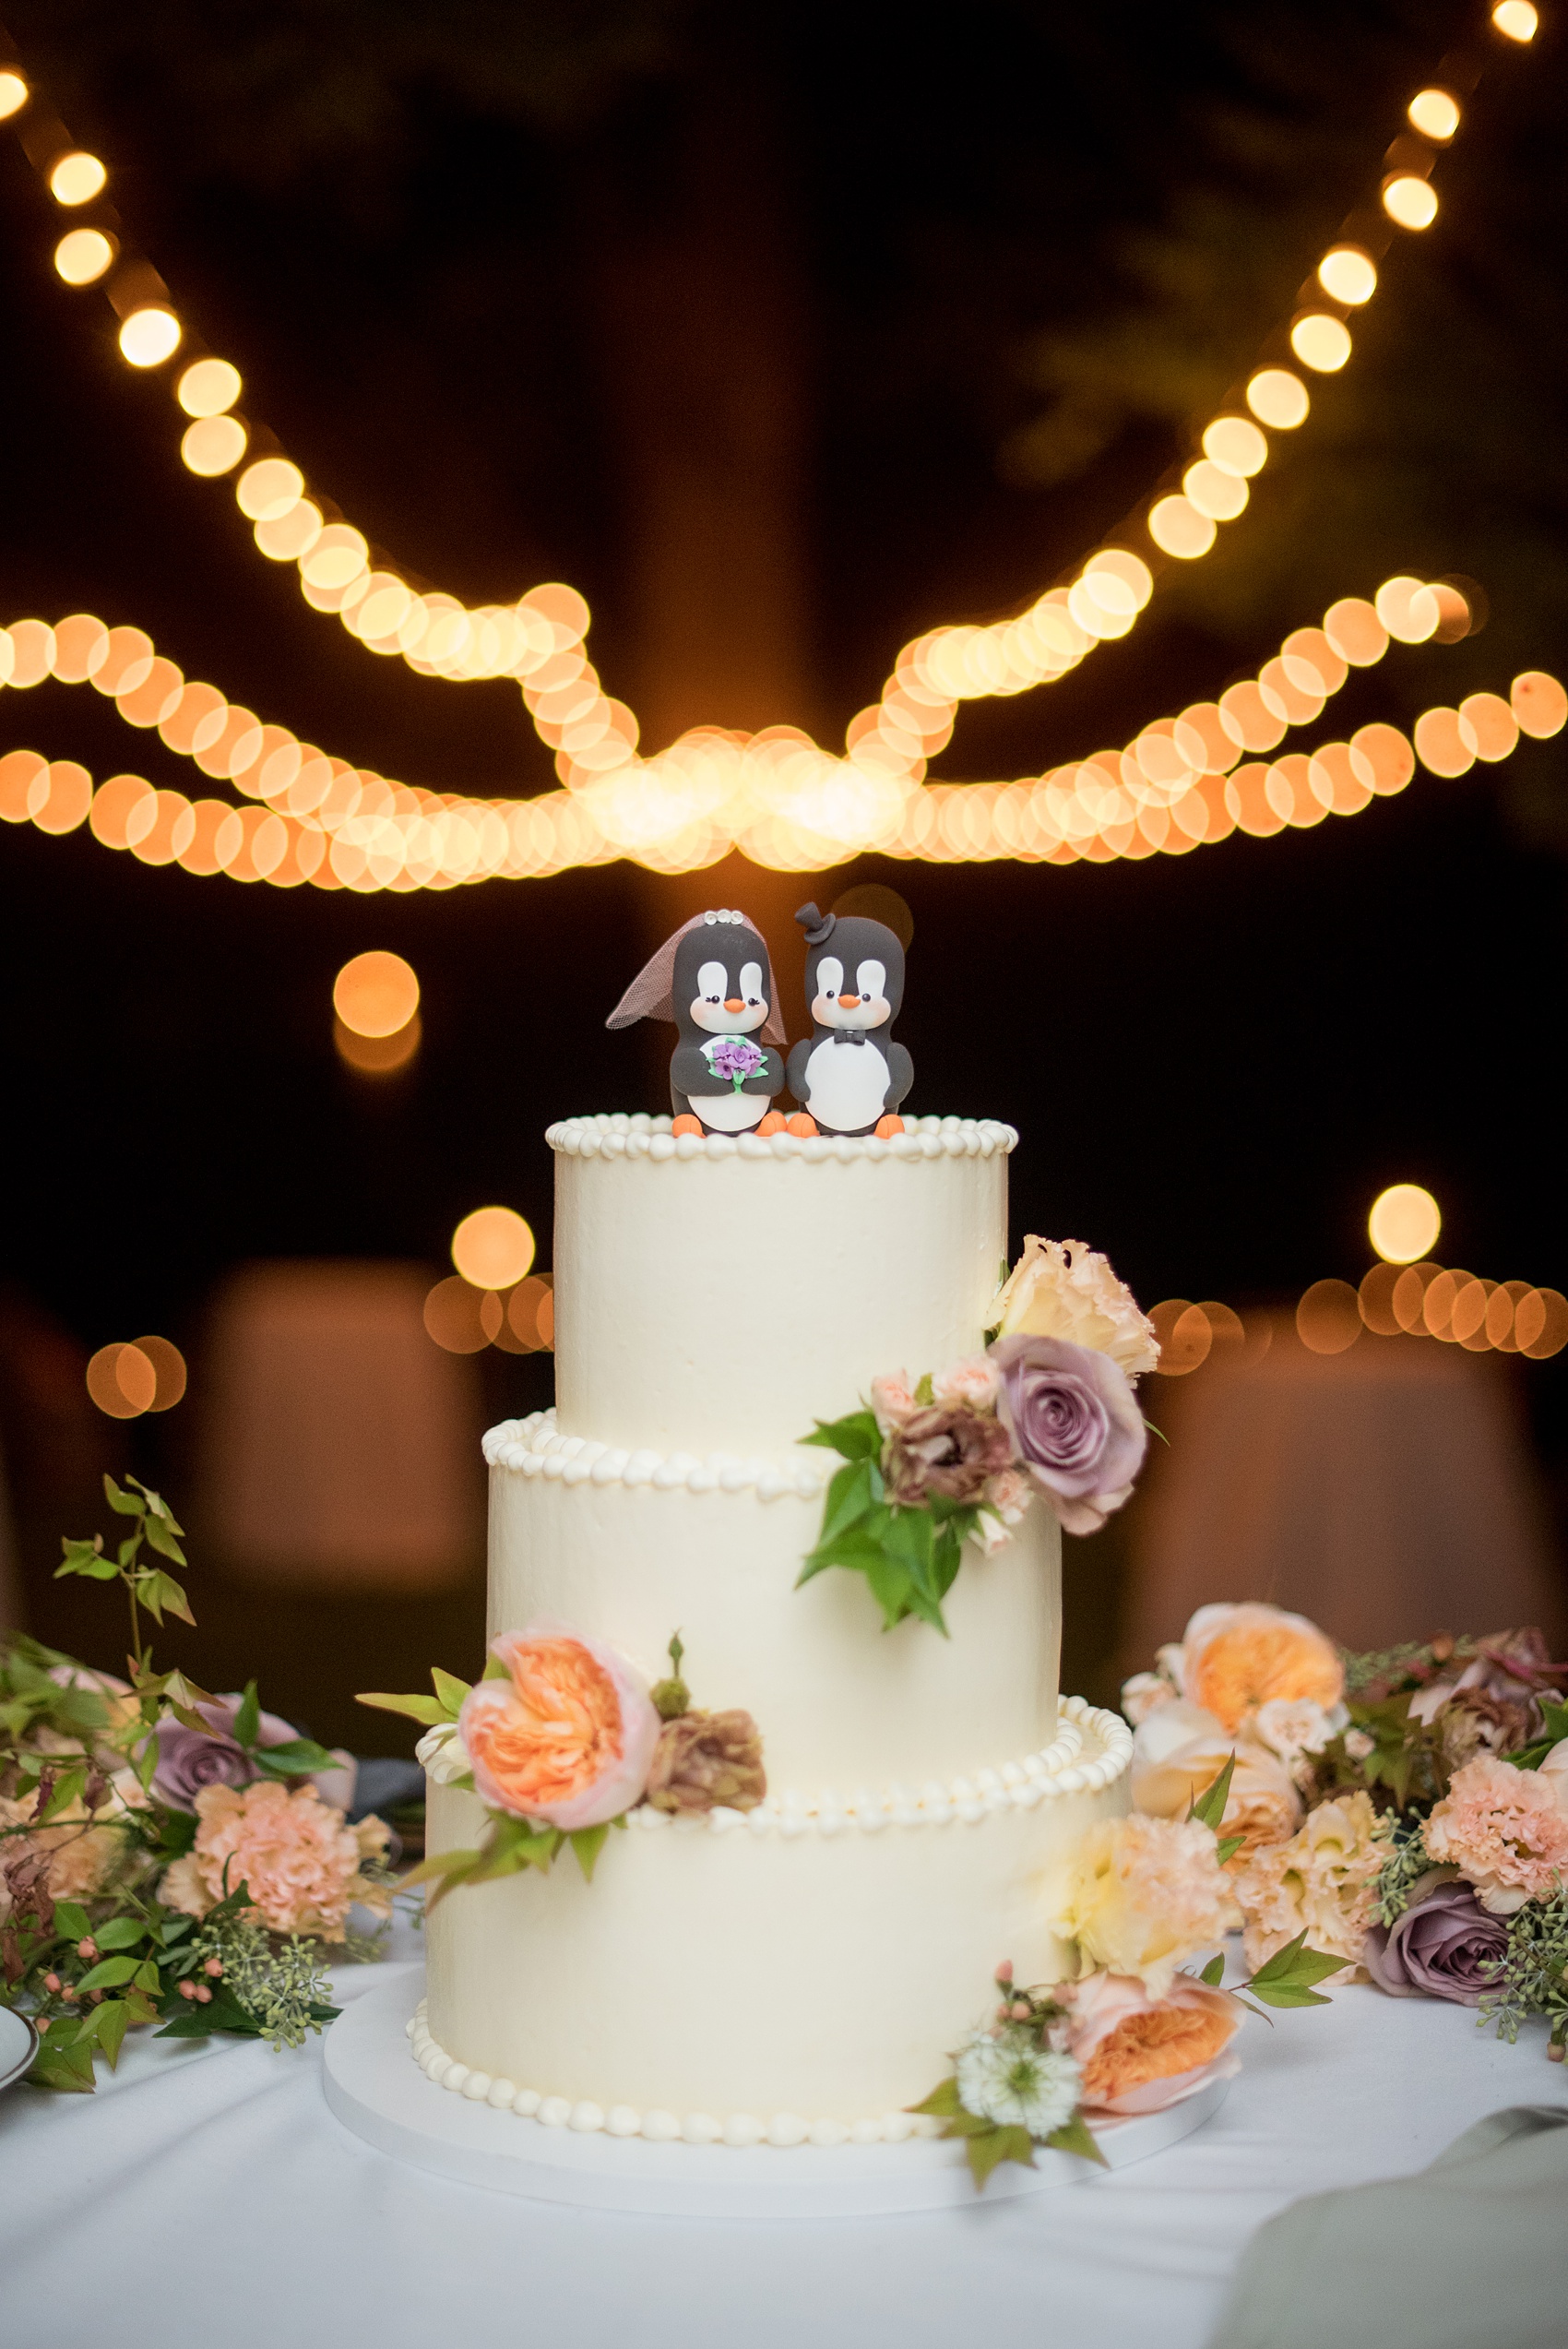 Mikkel Paige Photography photos from a Southwood Estate Wedding in Germantown, New York in the Hudson Valley. Picture of the white buttercream cake with penguin cake topper decorated with flowers.